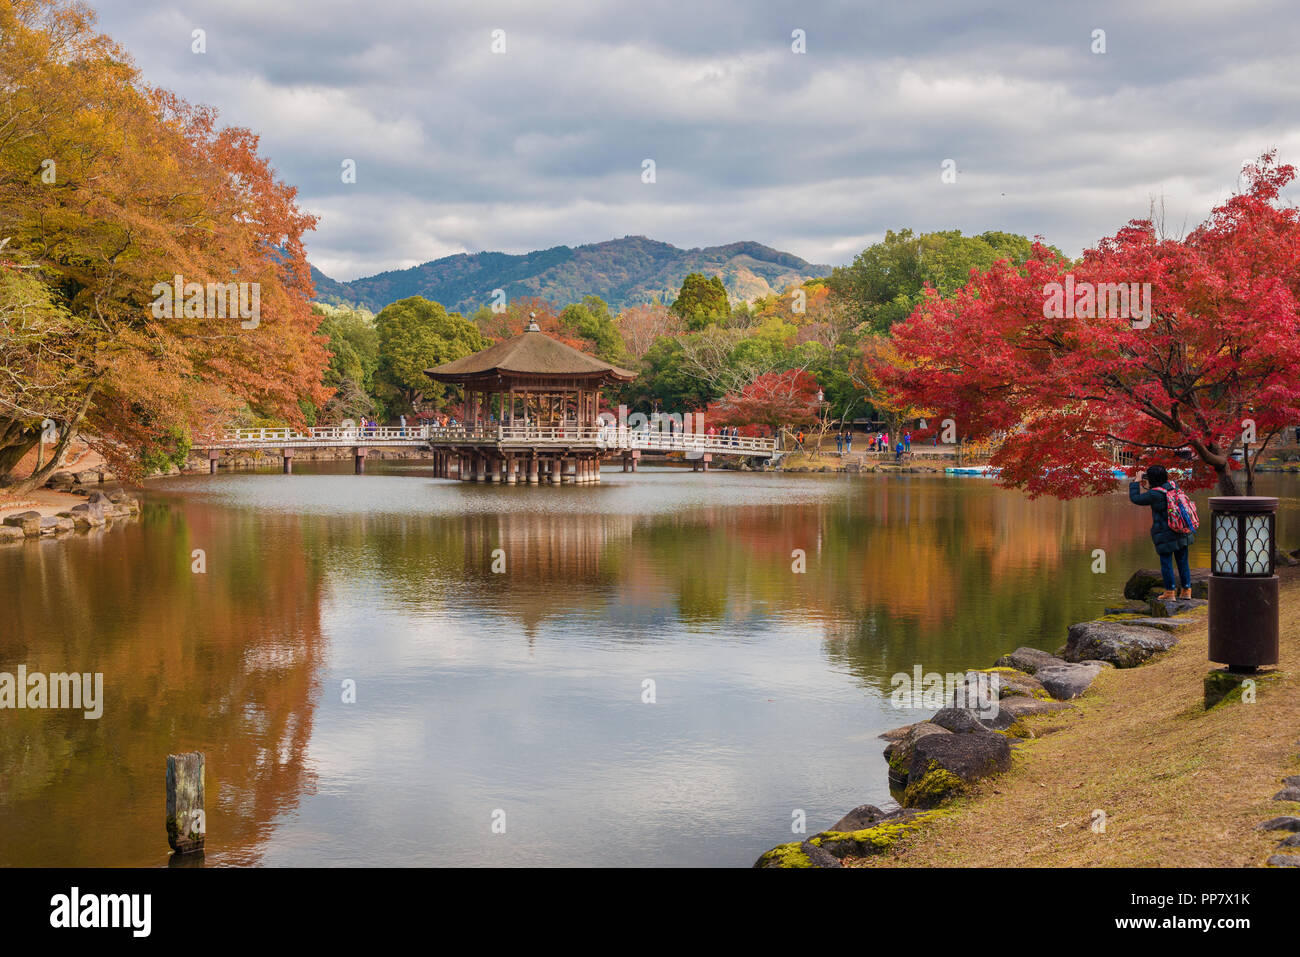 Tourists visit Nara public park in autumn, with maple leaves, pond and old pavilion Stock Photo